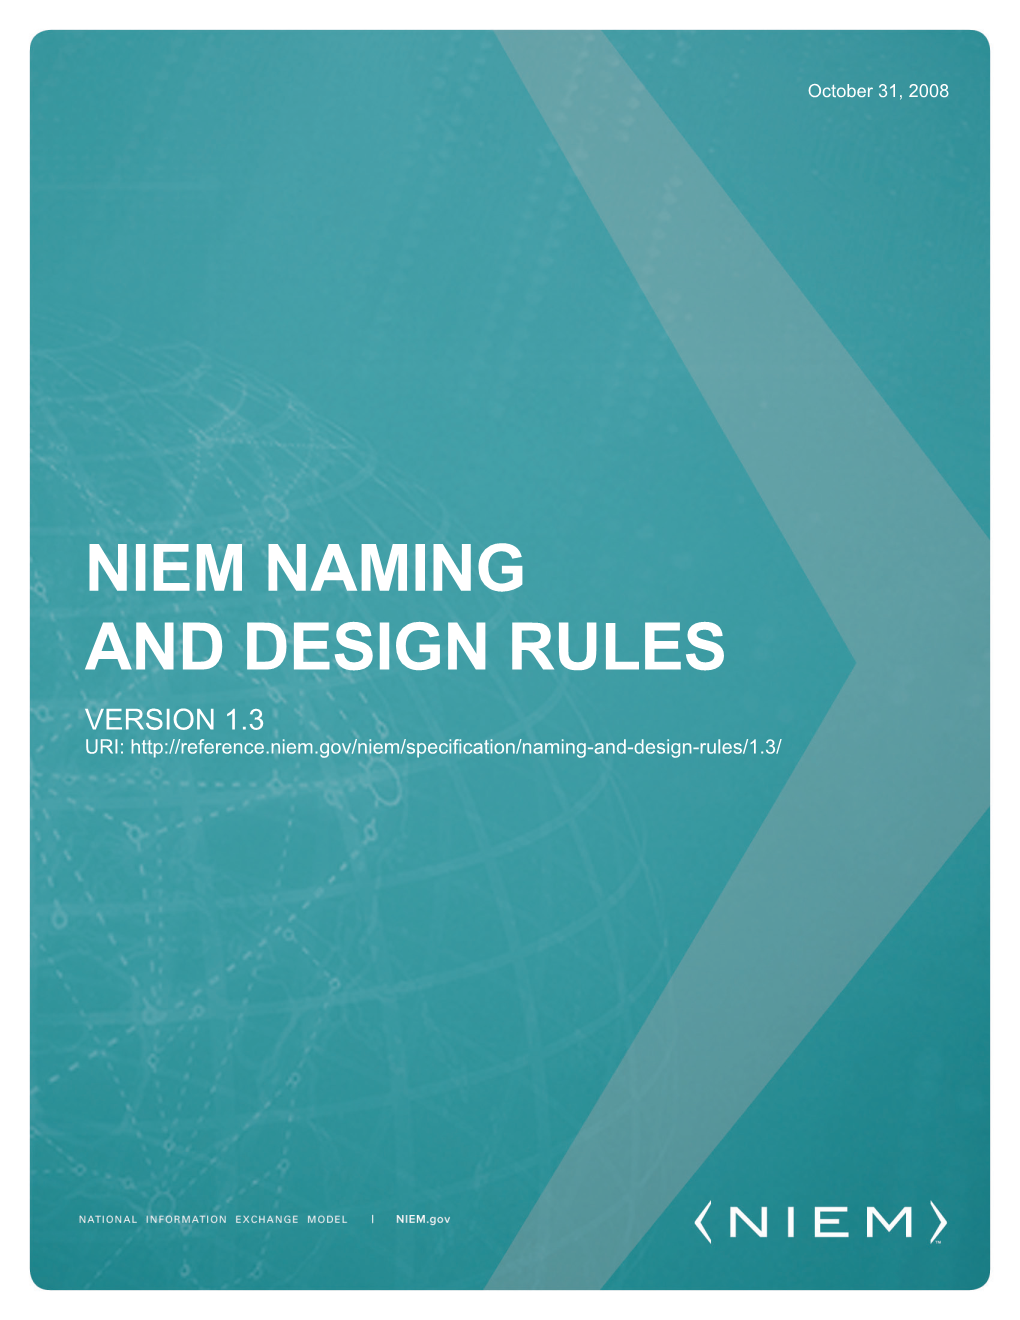 NIEM Naming and Design Rules (NDR) Specify NIEM-Conformant Components, Schemas, and Instances